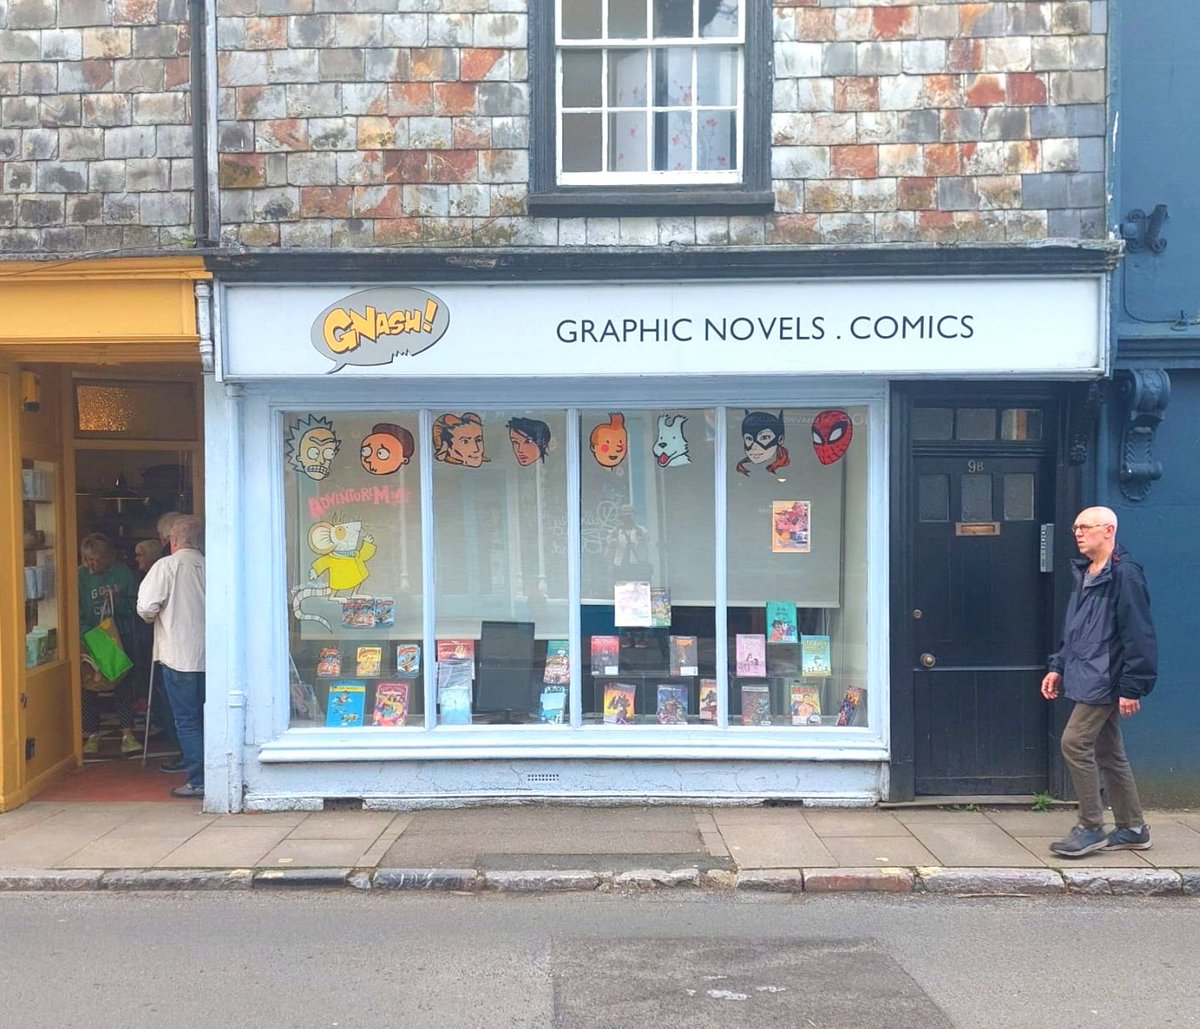 Apparently I was in the window of @gnashcomics at the weekend! Always nice to get reports from out in the world.